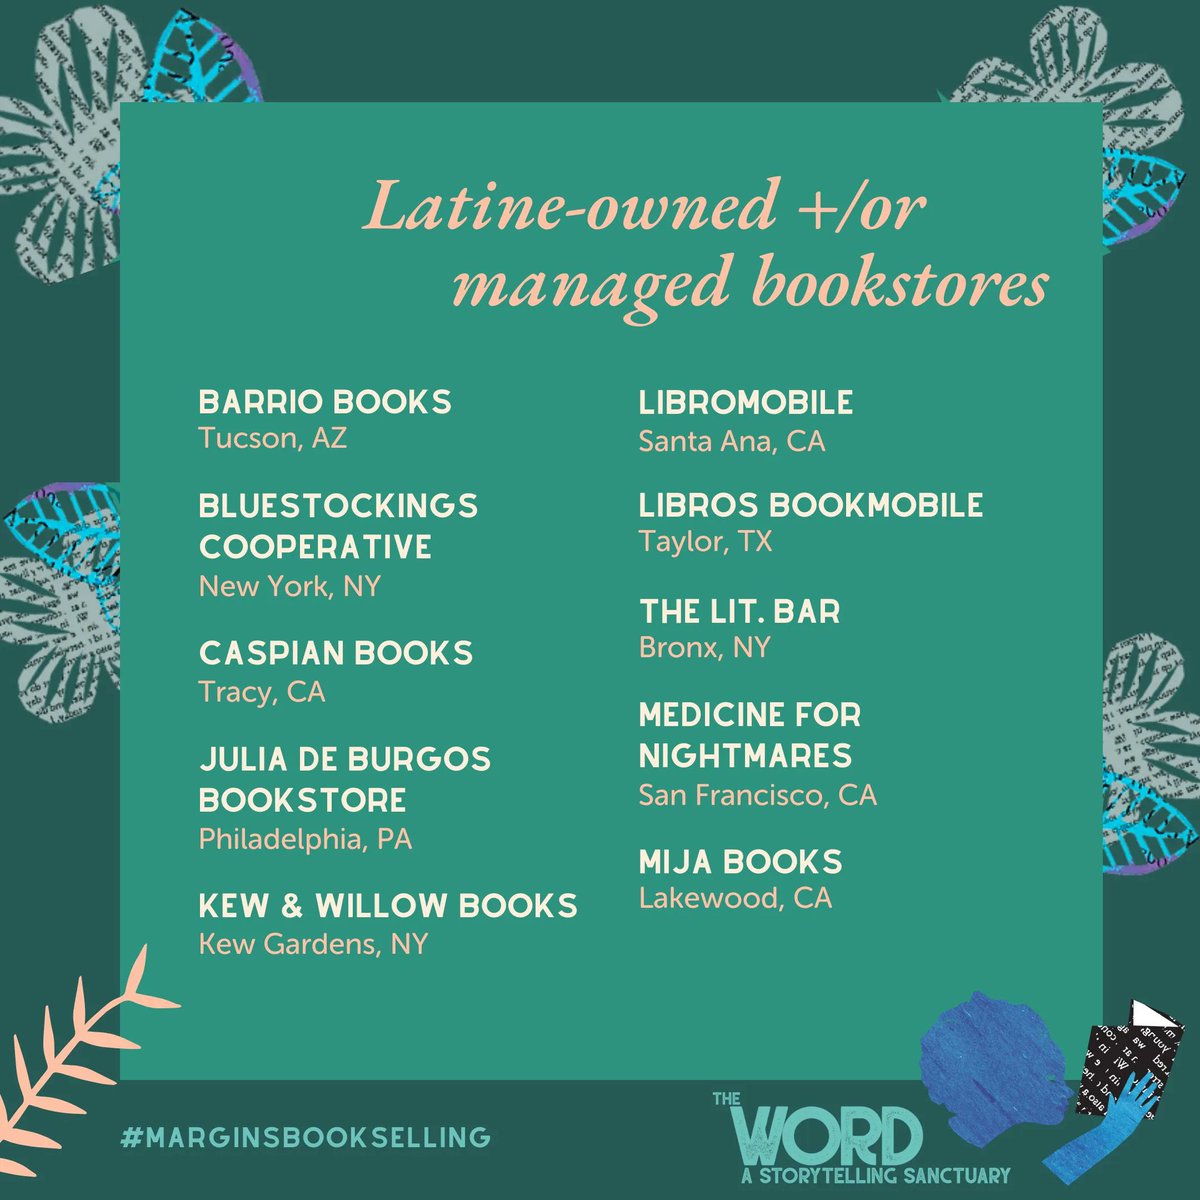 Celebrate Latine-owned and/or managed bookstores during #MarginsBookselling Month and during Latine Hispanic Heritage Month (9/15-10/15). Check out: Barrio Books, @bluestockings, Caspian Books, Julia de Burgos Bookstore, @kewandwillow, @libromobile, Libros Bookmobile, @thelitbar